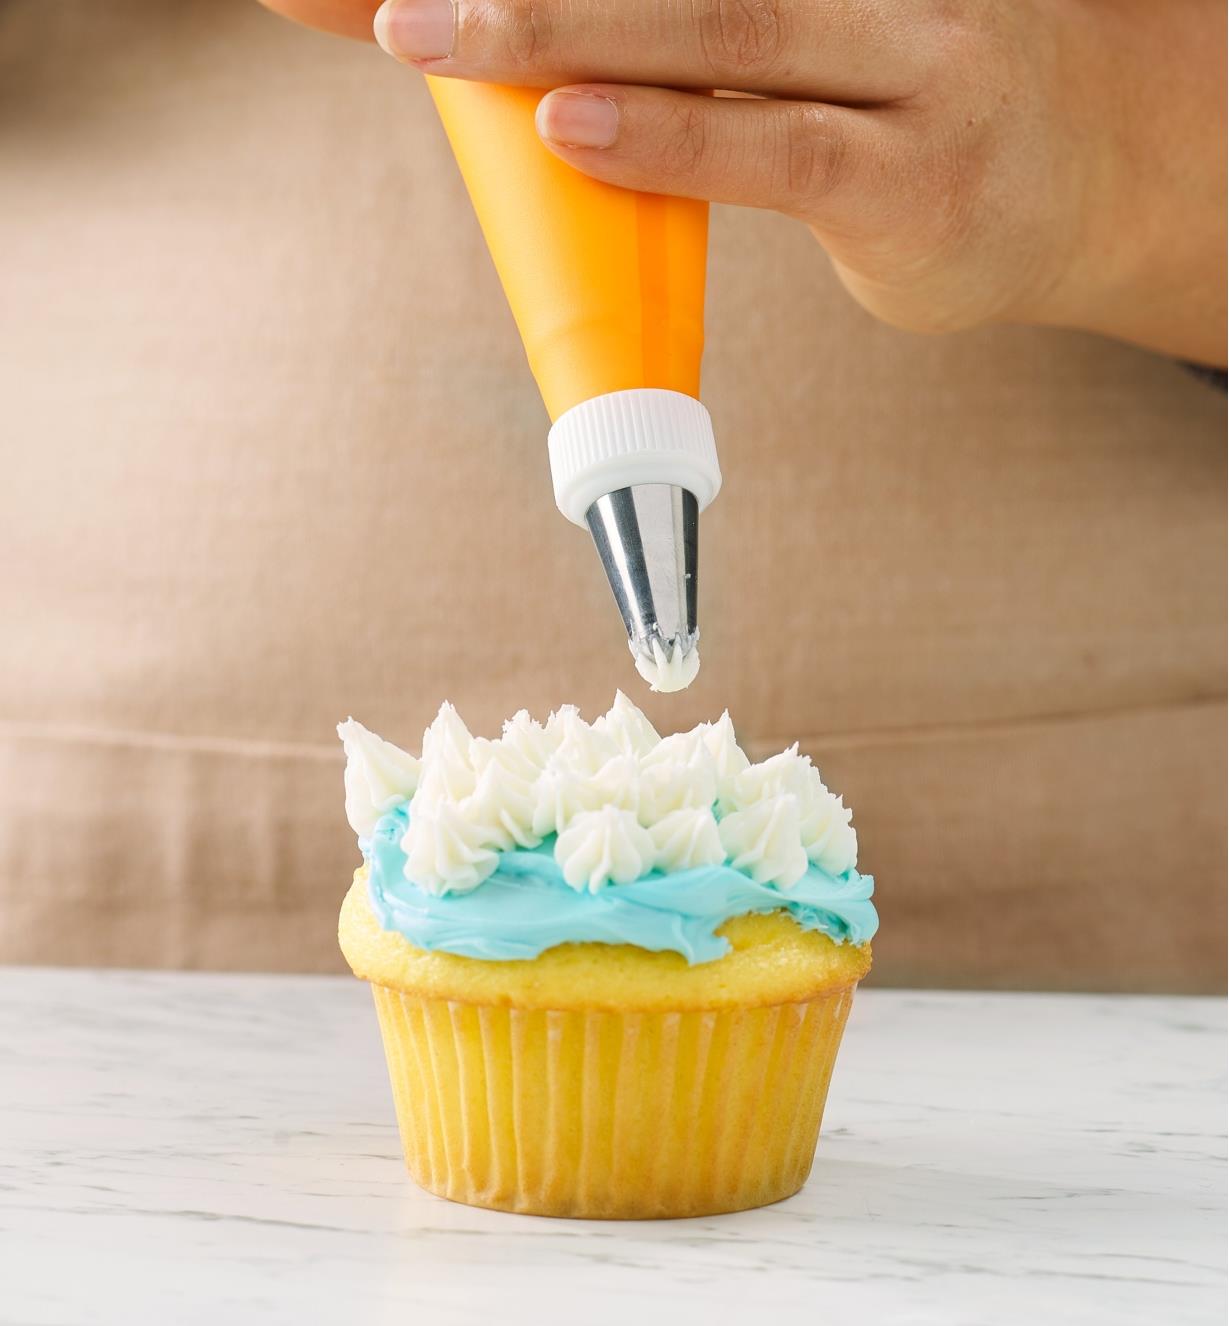 Decorating a cupcake using the piping bag and an icing tip